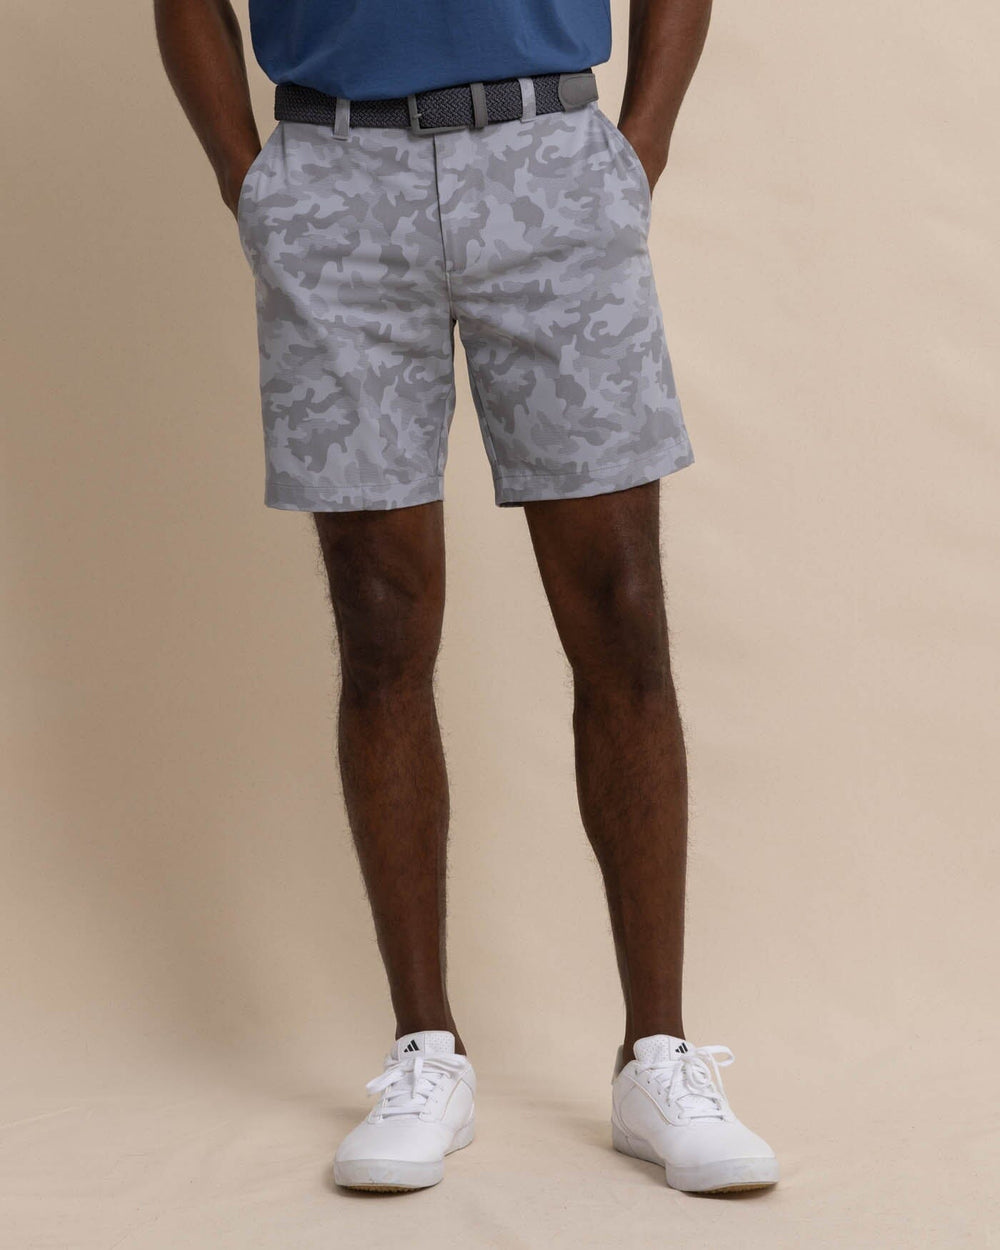 The front view of the Southern Tide brrr die Island Camo Printed Short by Southern Tide - Ultimate Grey